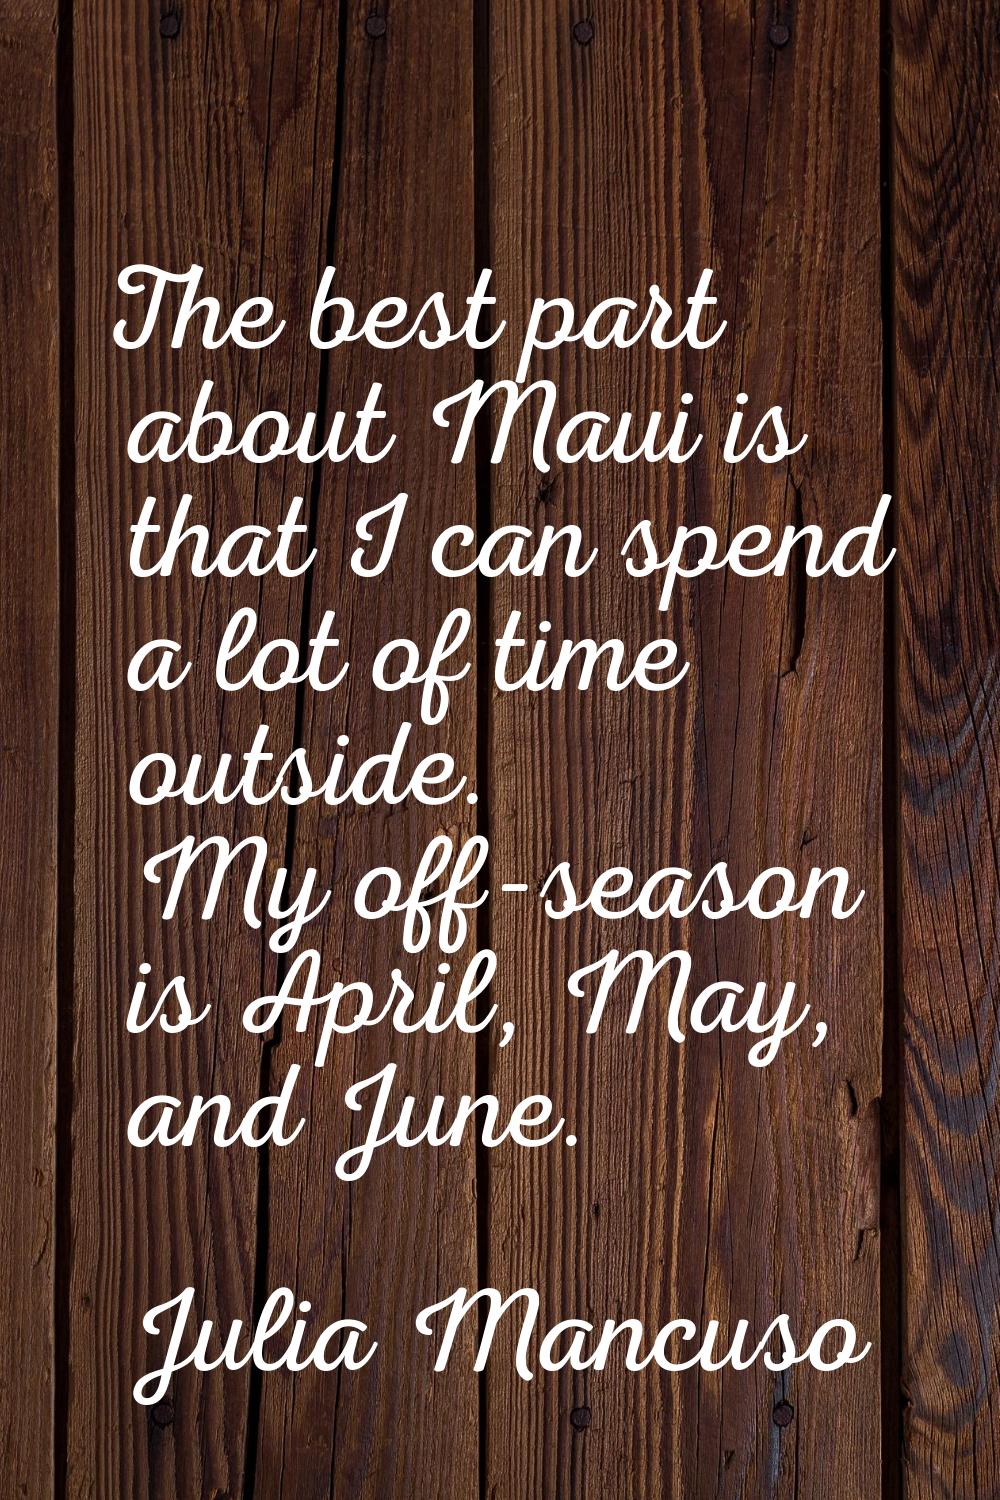 The best part about Maui is that I can spend a lot of time outside. My off-season is April, May, an